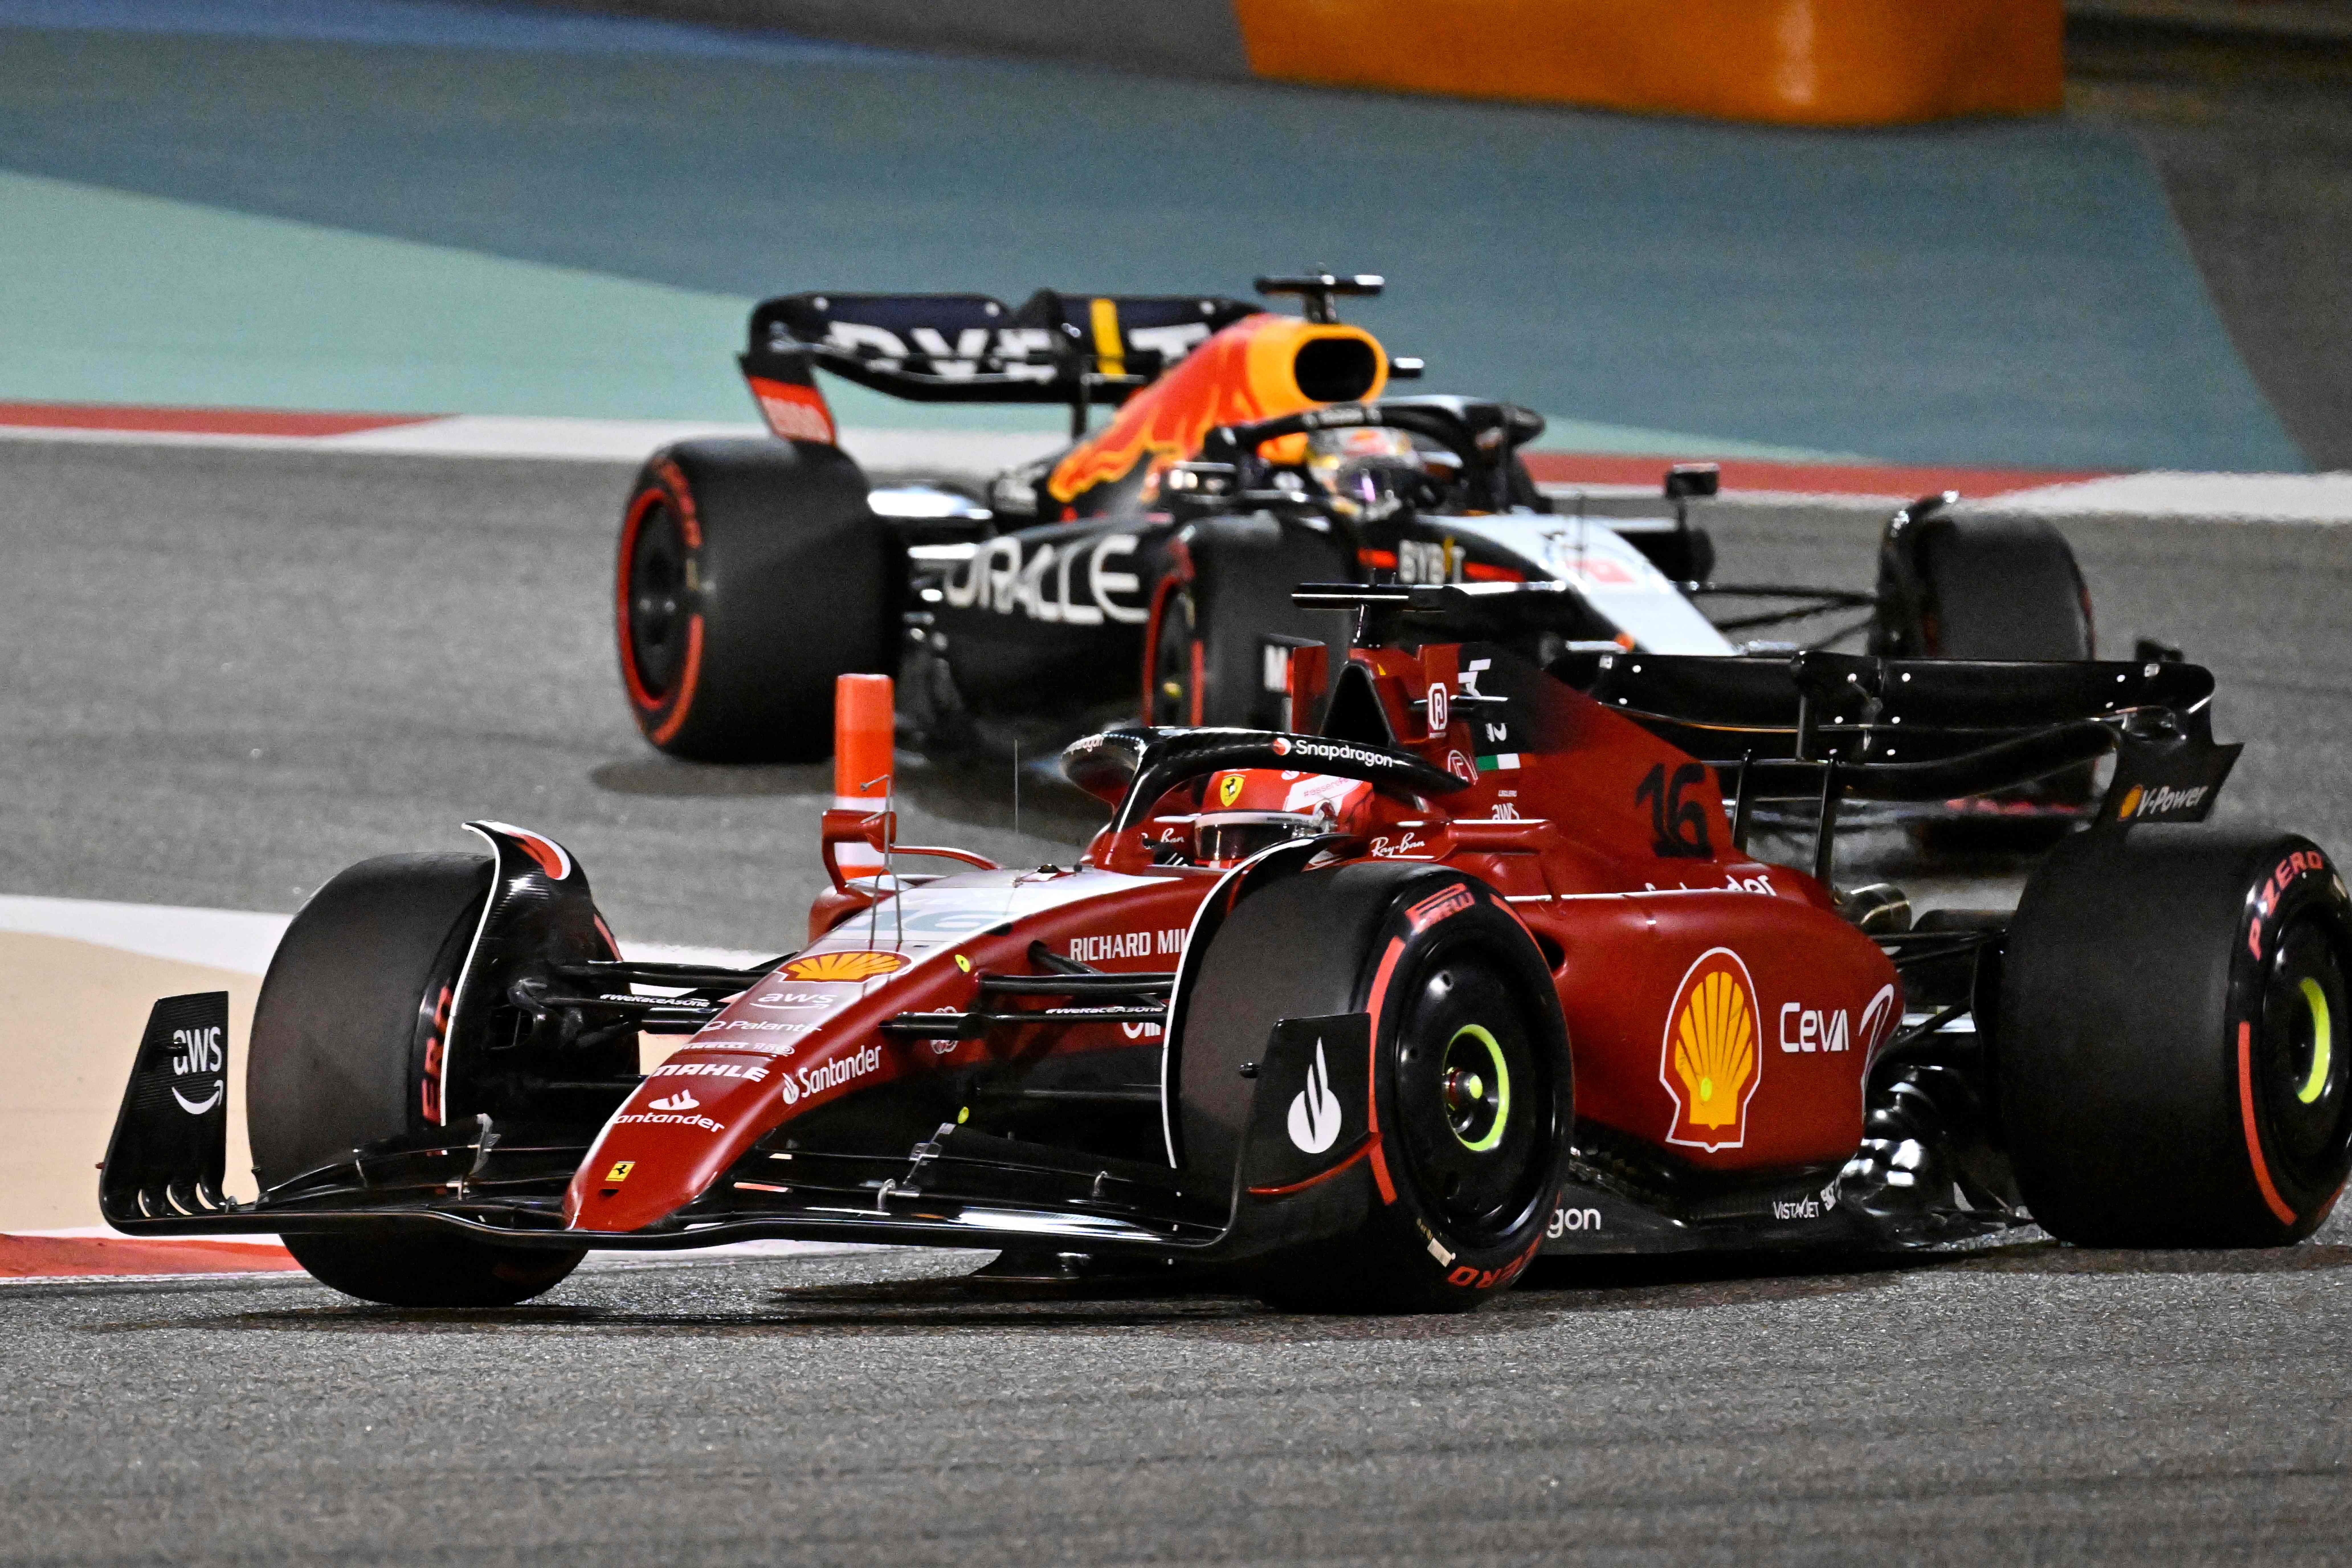 How and where to watch F1 in the UAE